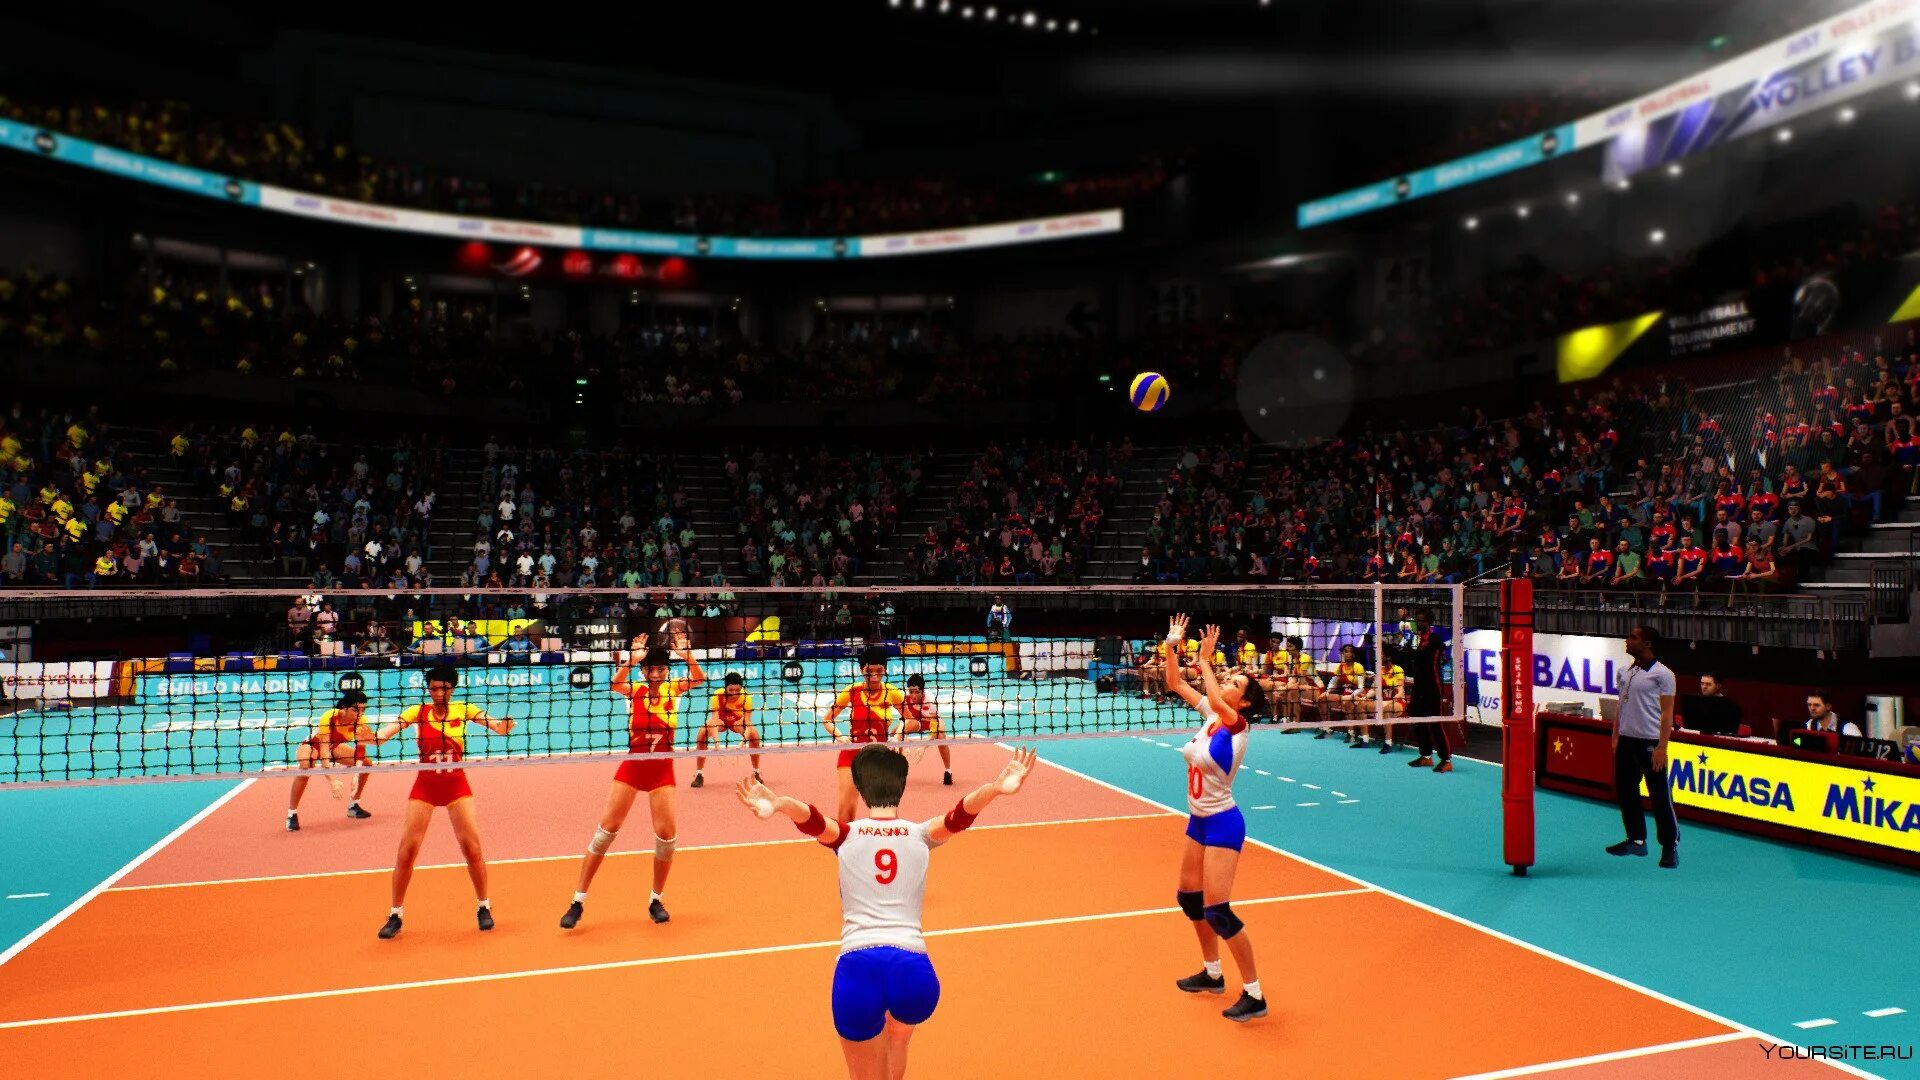 Spike Volleyball. The Spike Volleyball игра. Spike в волейболе. Spike Volleyball (PC).